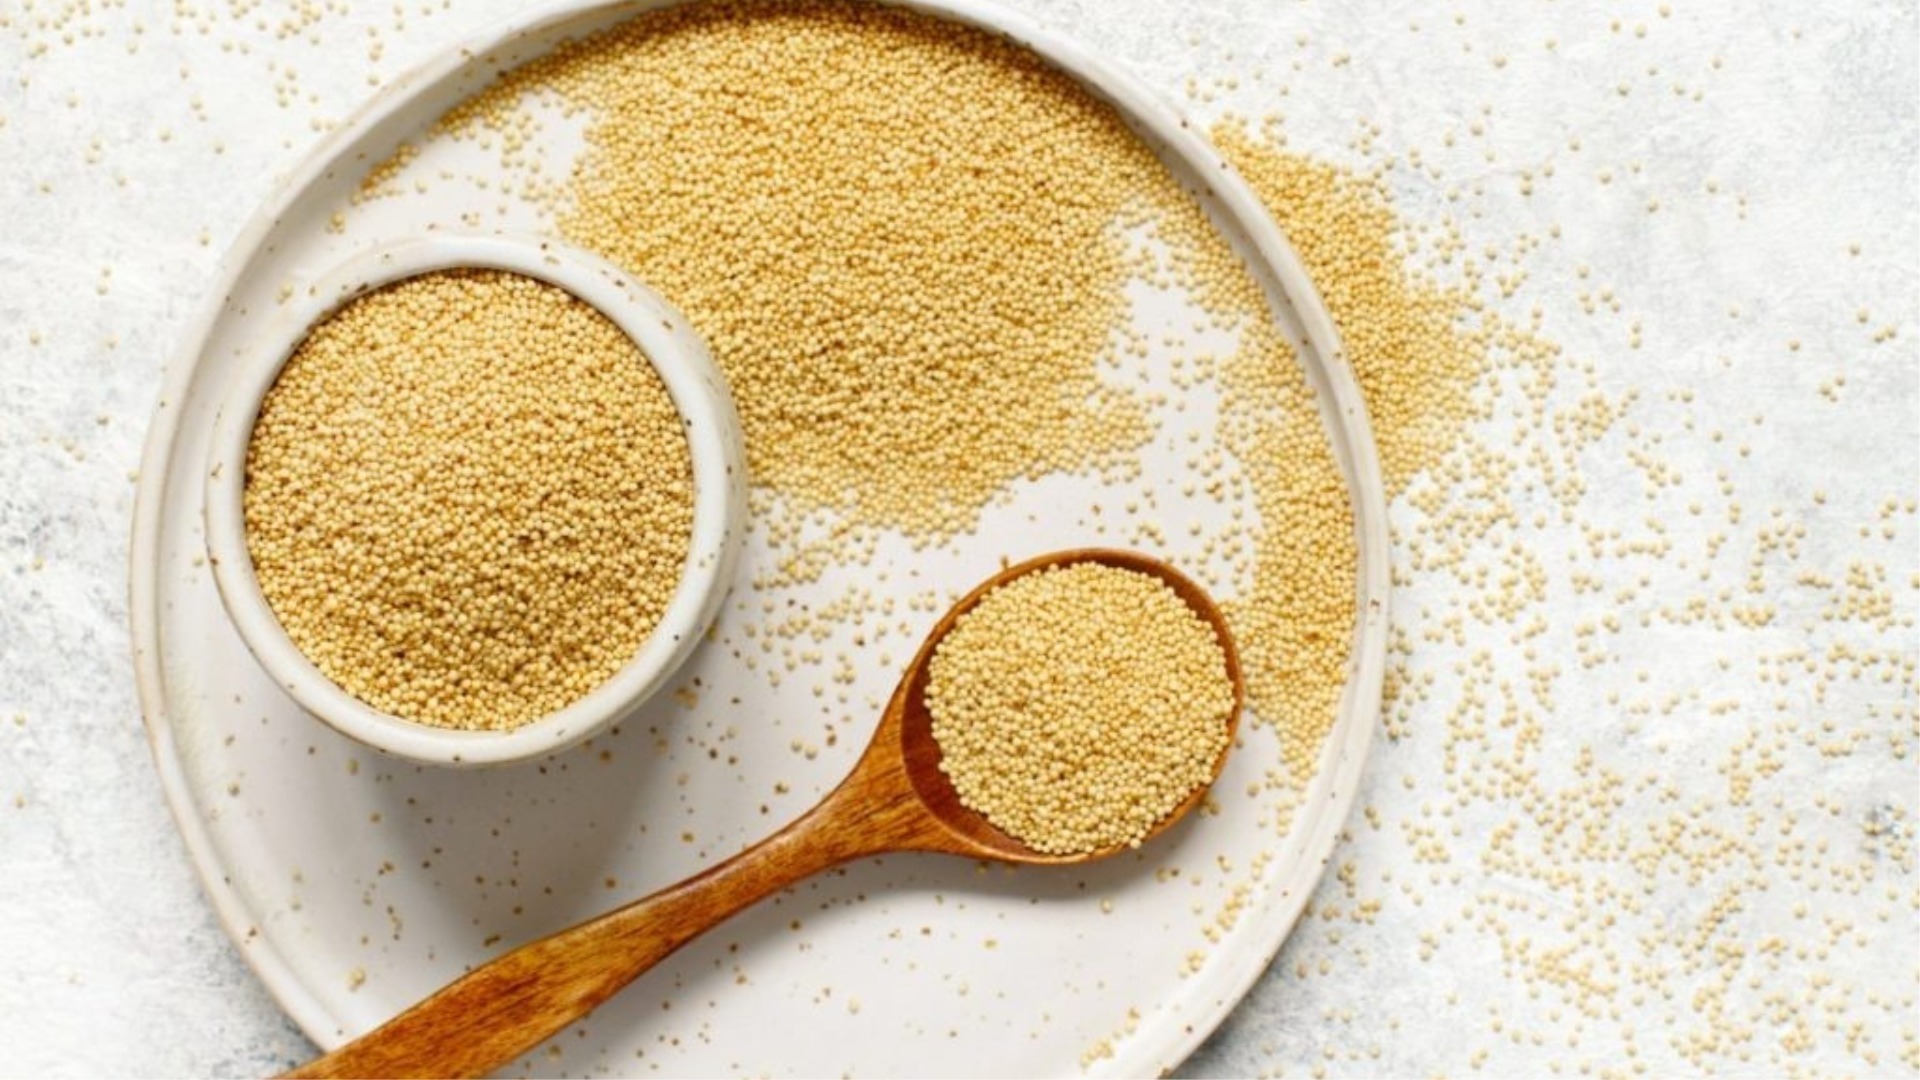 amaranth:-what-you-need-to-know-about-the-buzzing-superfood-grain